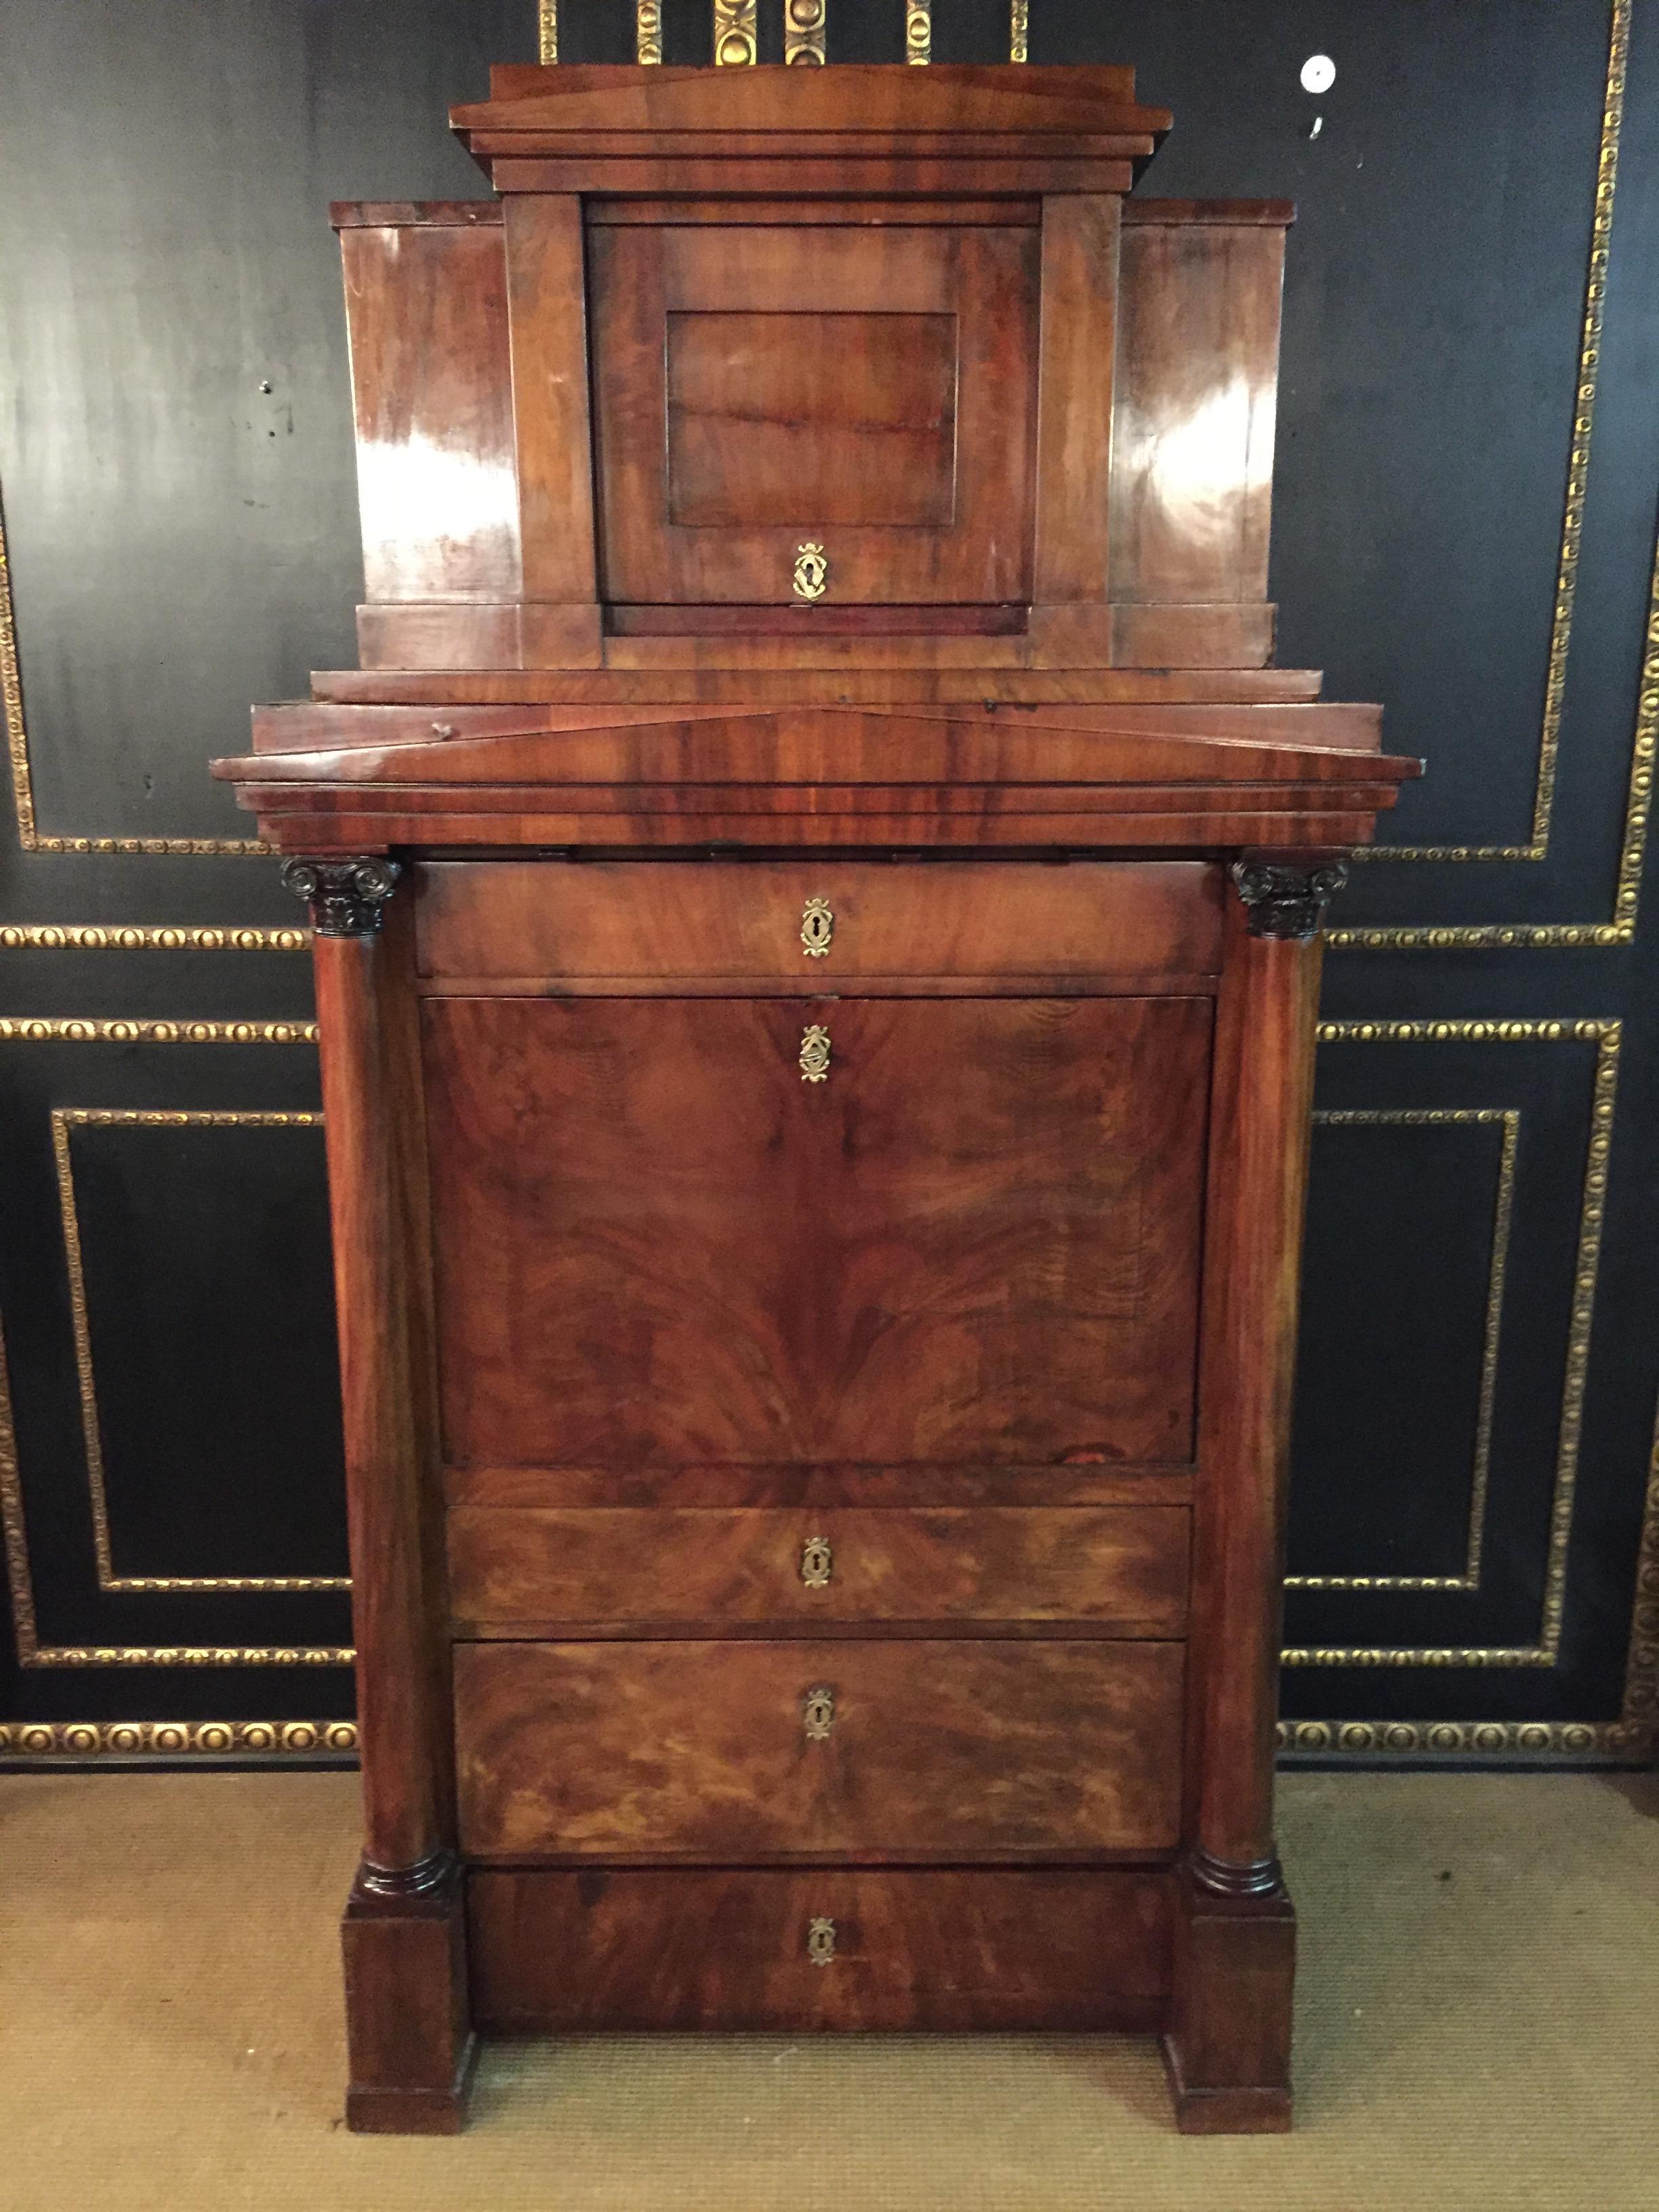 Early 19th century Biedermeier secretary cabinet composed of mahogany and featuring a series of drawers and on the top is a door as well as carved Corinthian column decorations.
  